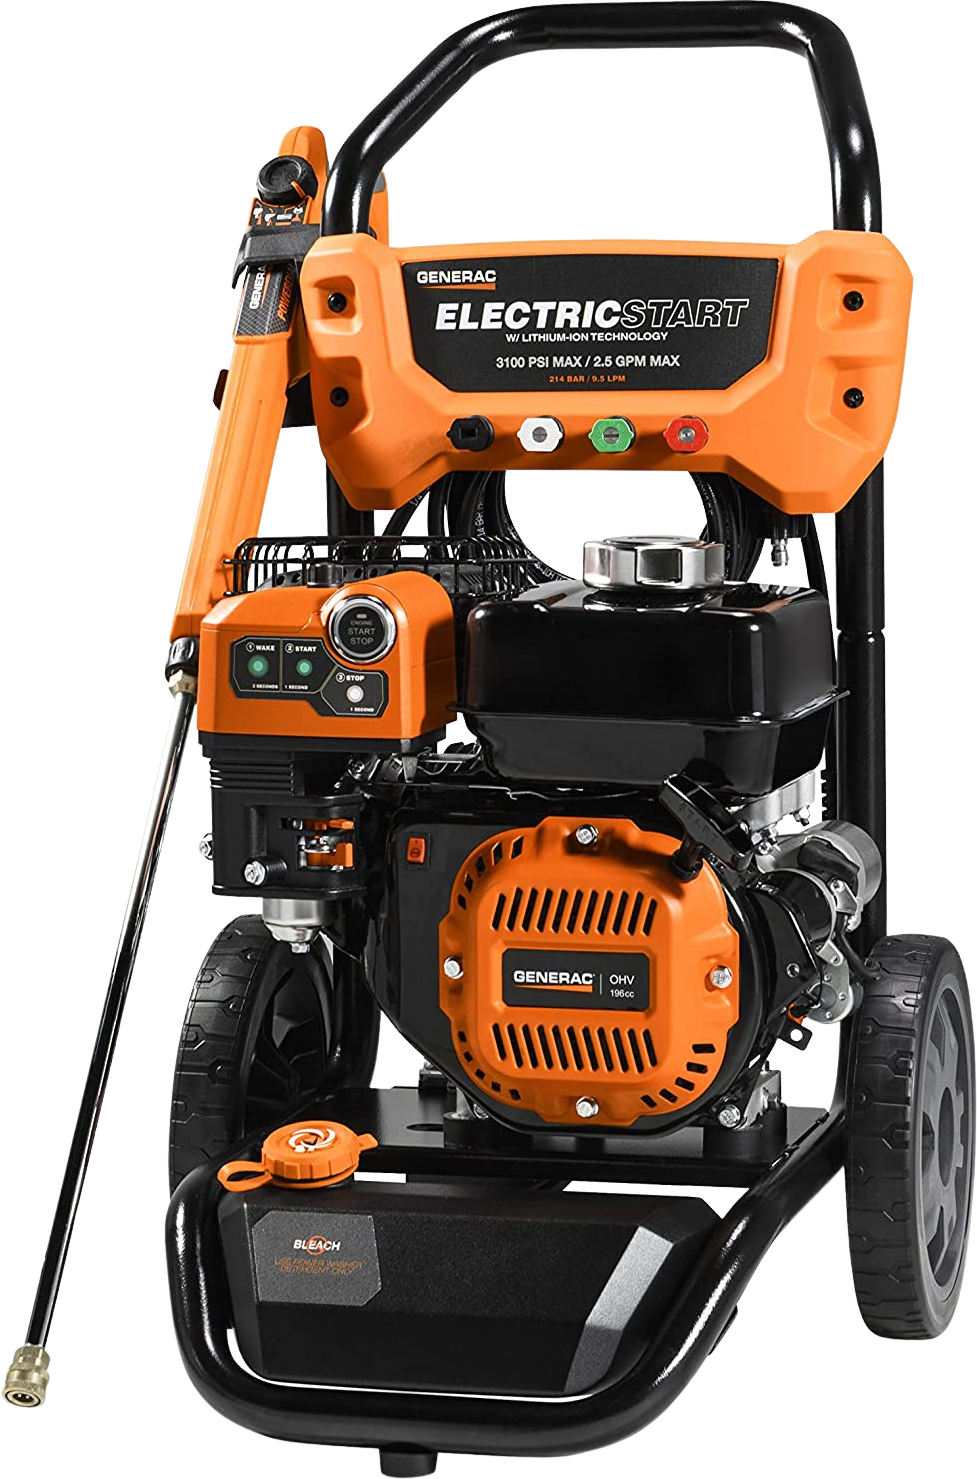 Generac, Generac 3100 PSI 2.5 GPM Electric Start Gas Pressure Washer Kit with Attachments 8895 New